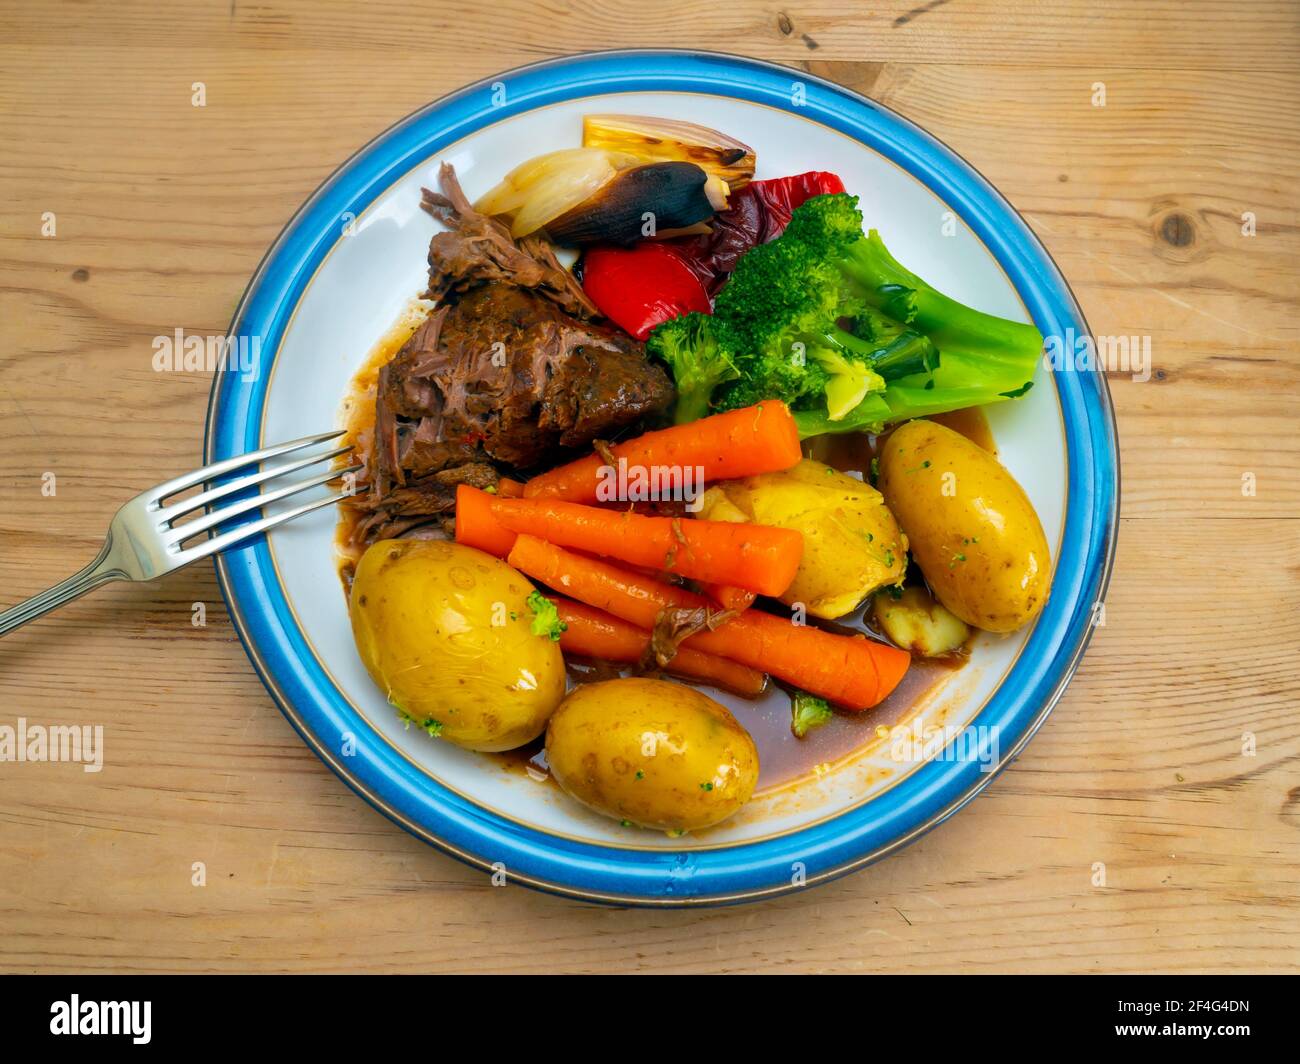 Sunday Lunch main course tender peppery British Beef new potatoes grilled peppers shallots  carrots and broccoli  with red wine gravy Stock Photo